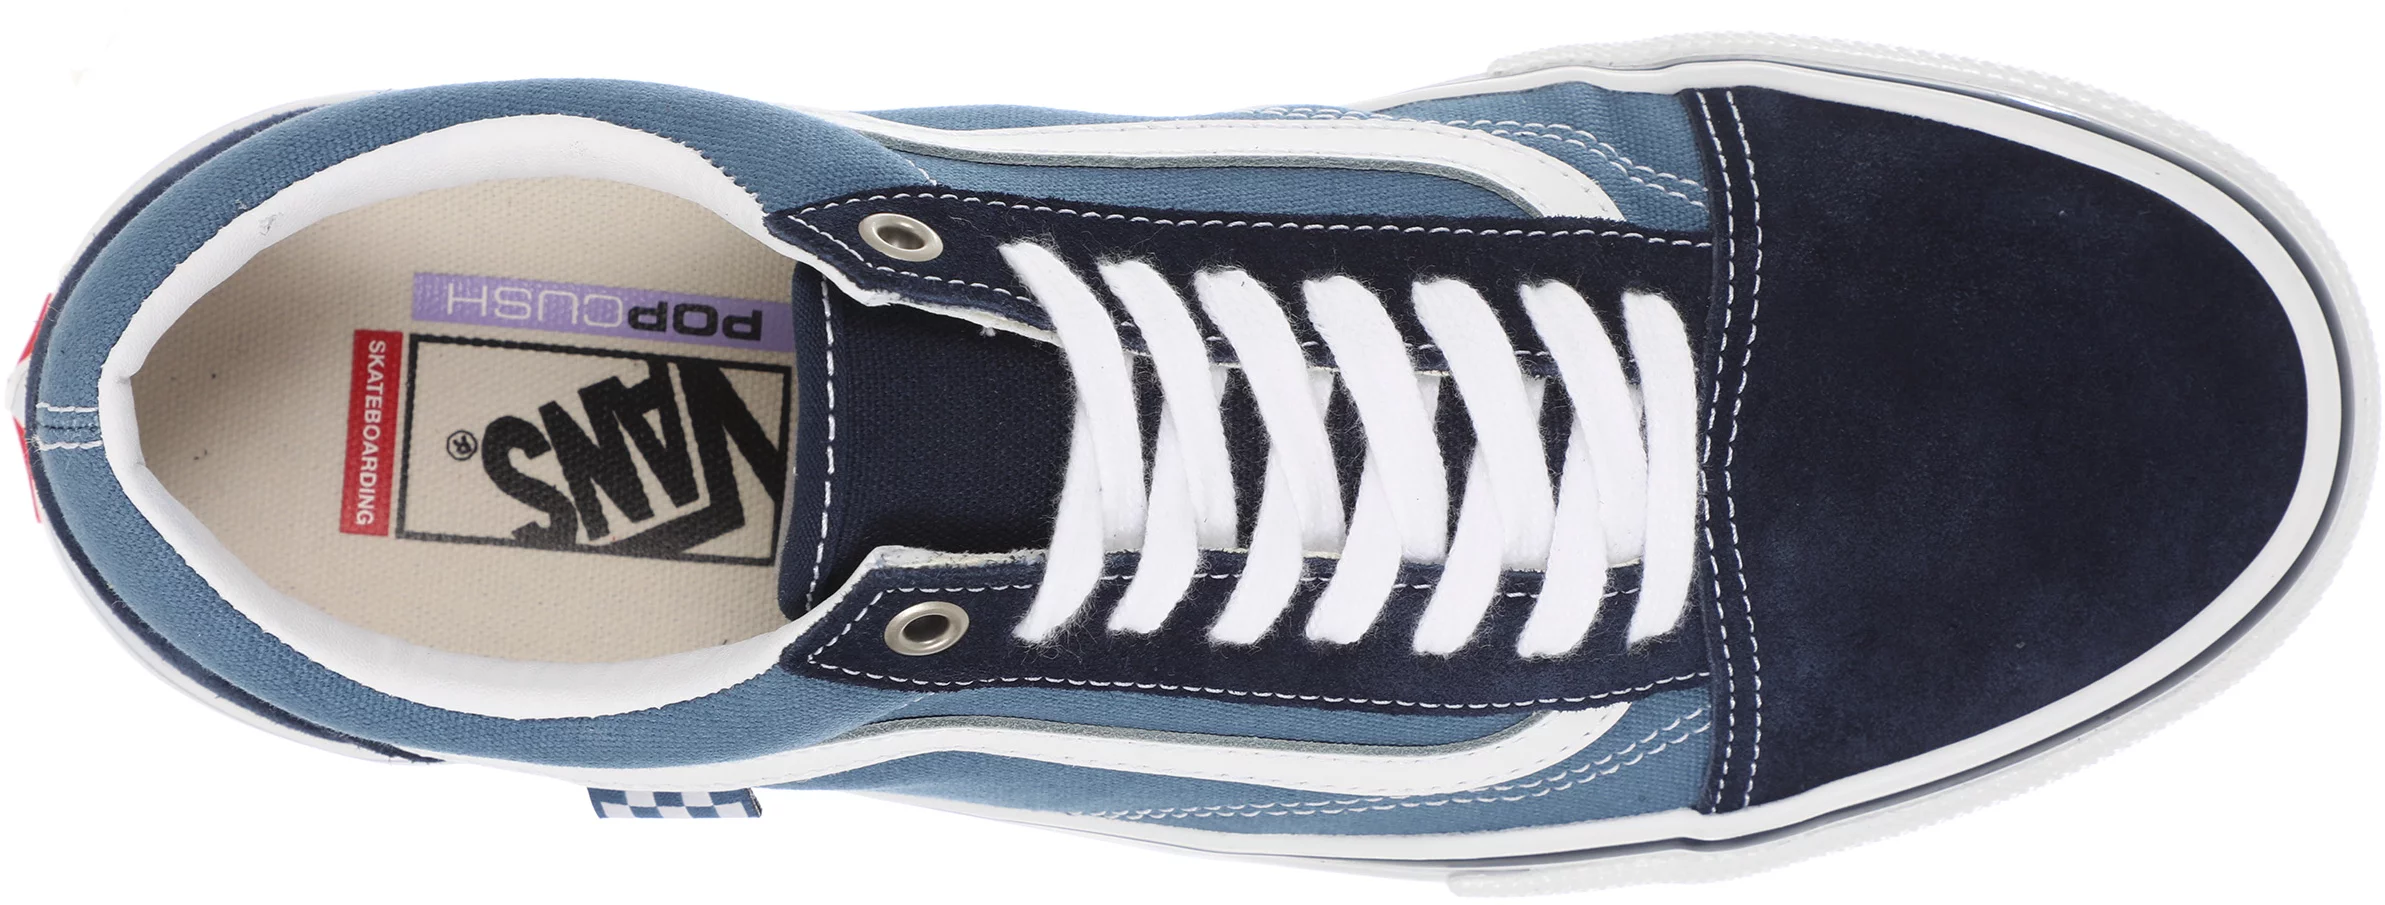 Vans Skate Old Skool Shoes - navy/white - Free Shipping | Tactics